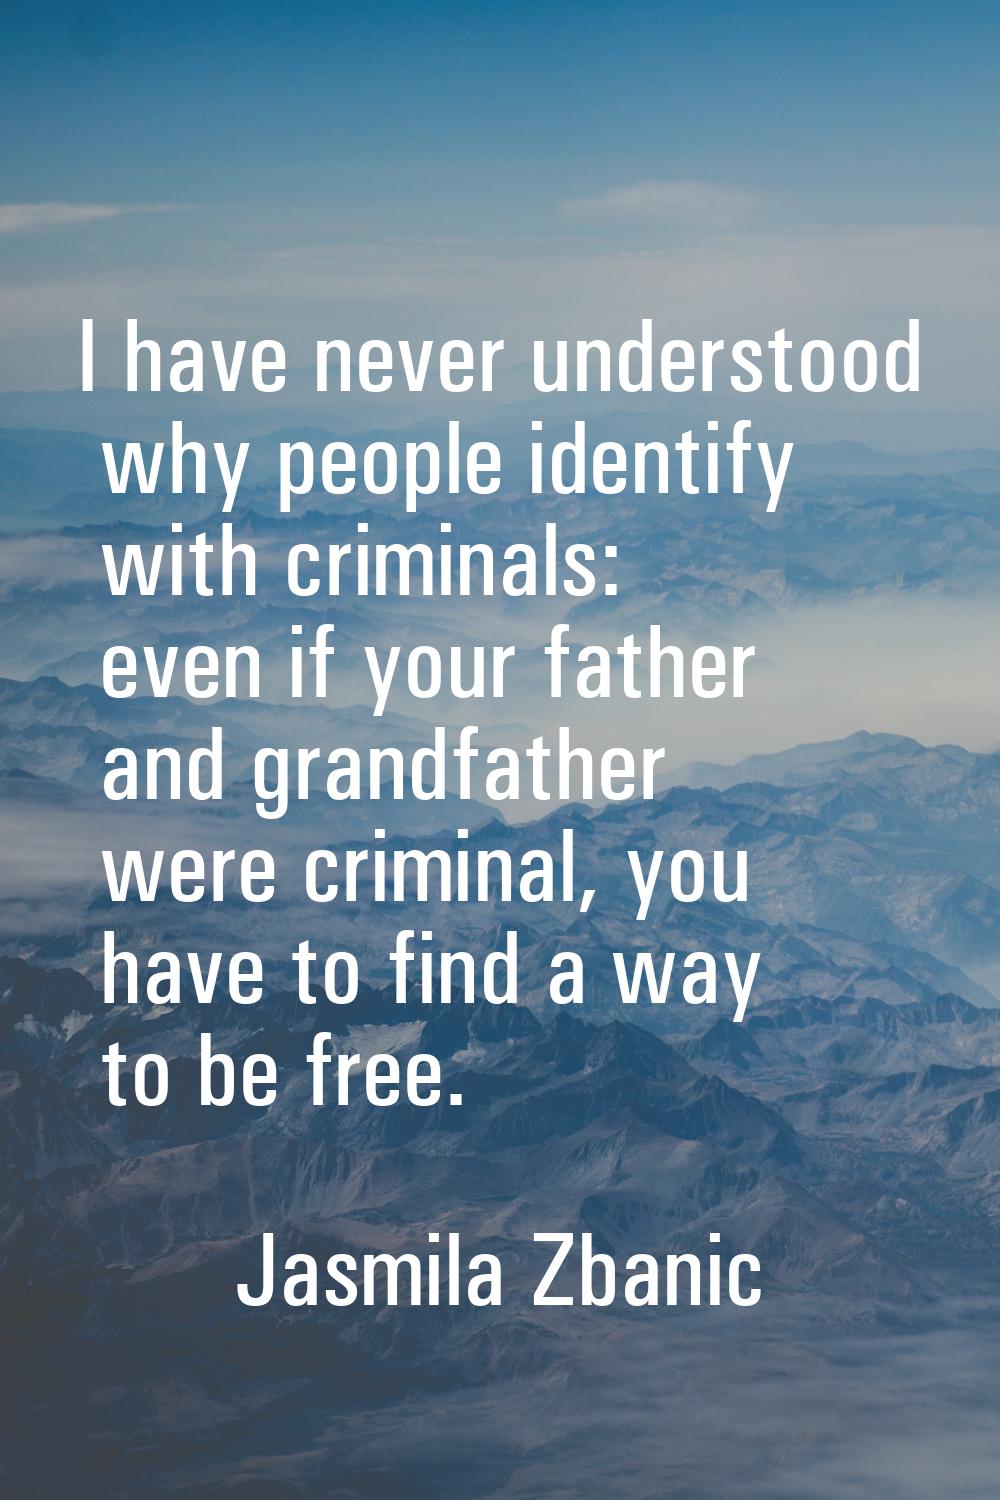 I have never understood why people identify with criminals: even if your father and grandfather wer